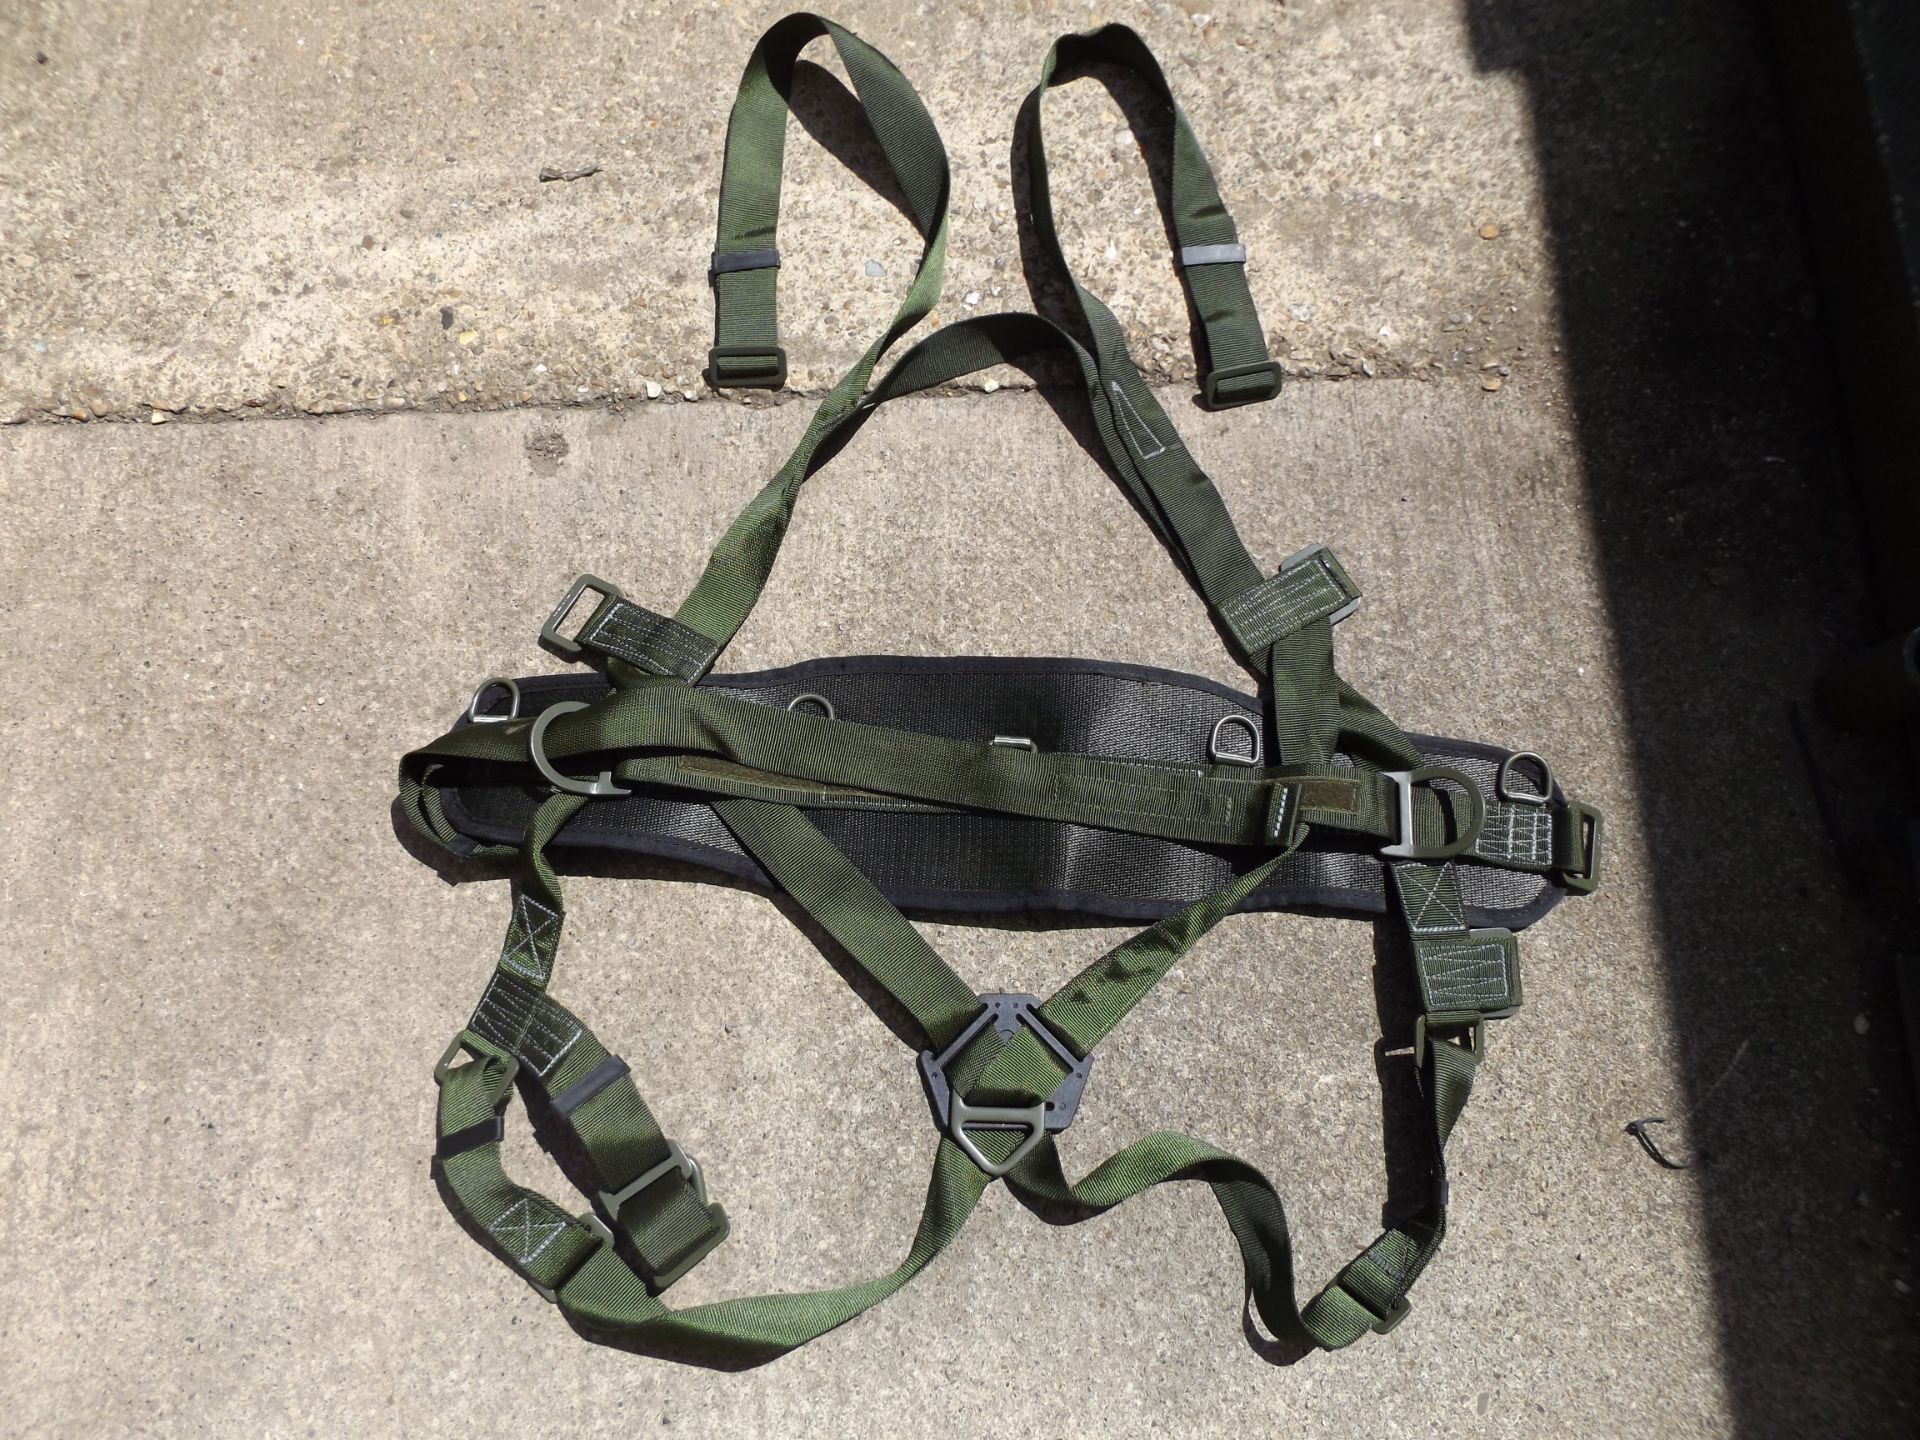 Spanset Full Body Harness with Work Position Lanyards - Image 2 of 10